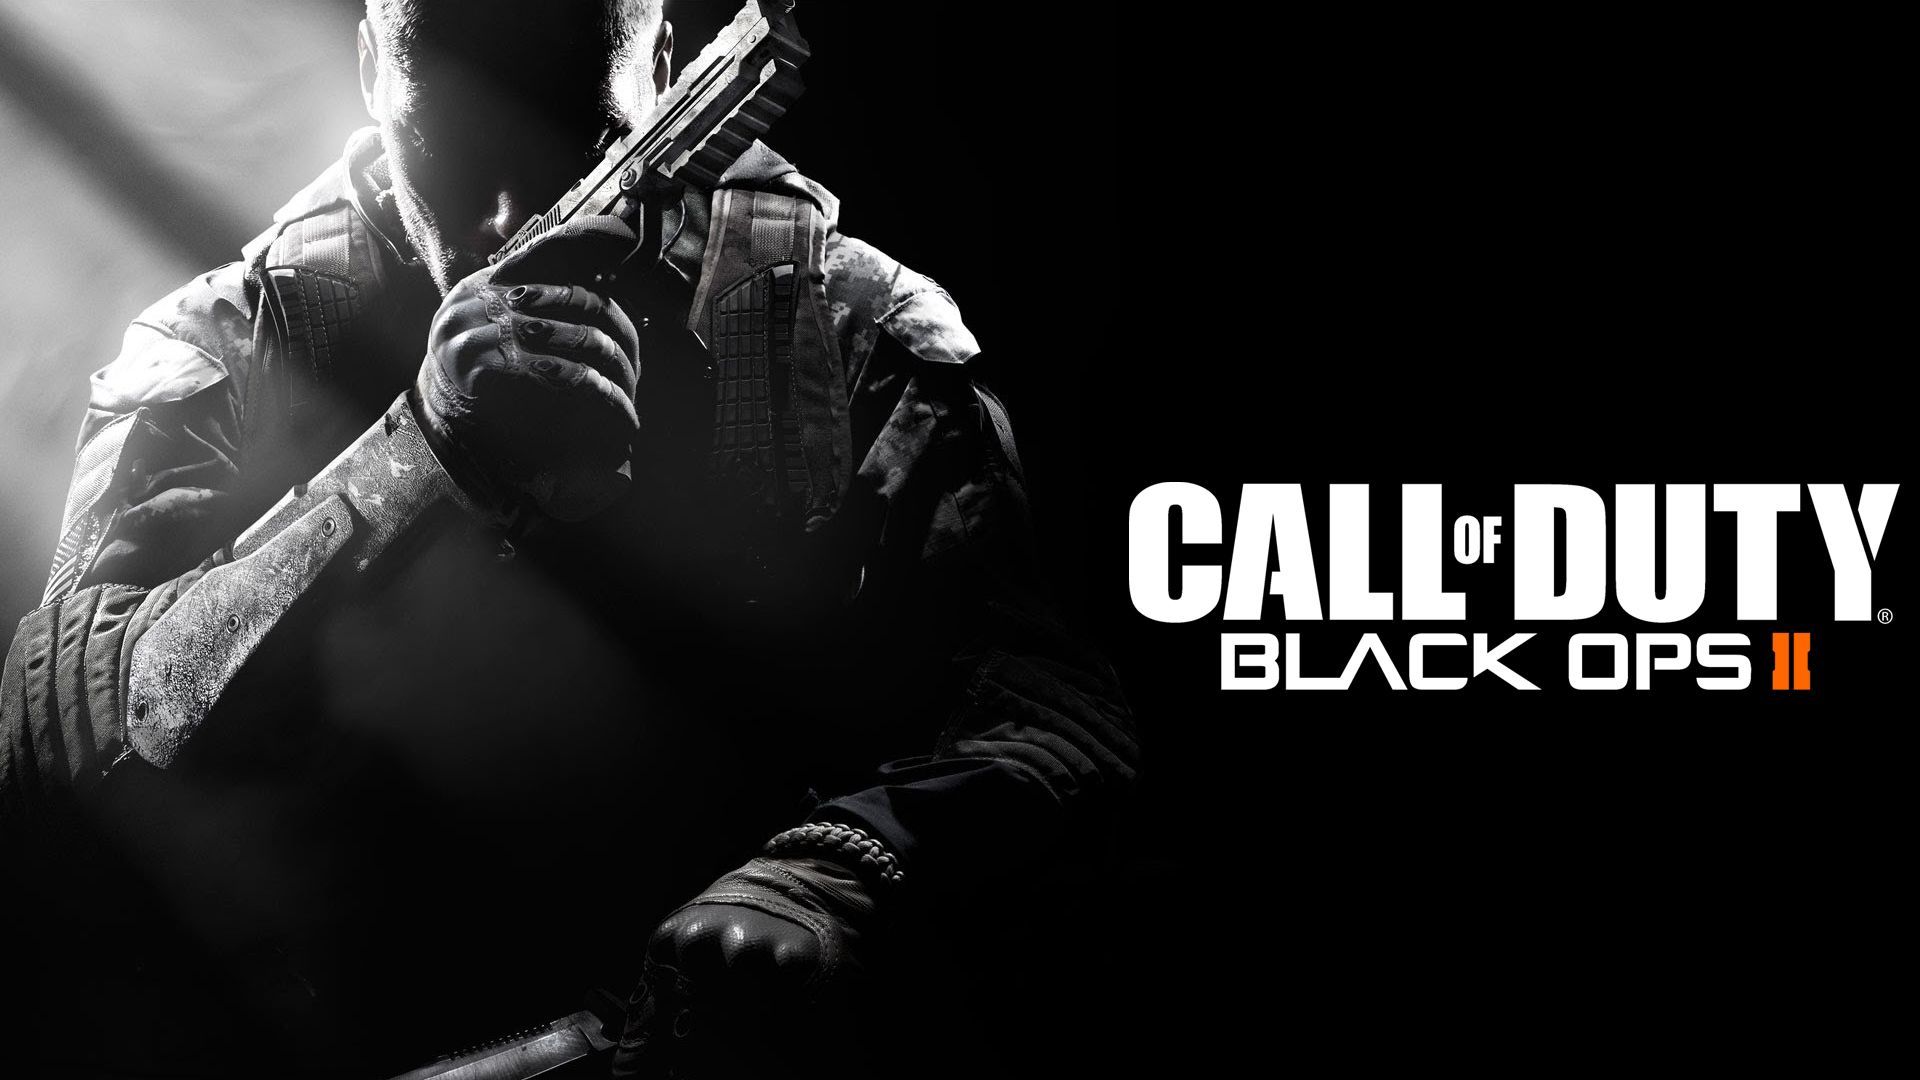 Download Call Of Duty Black Ops Ii Wallpaper Full HD Backgrounds